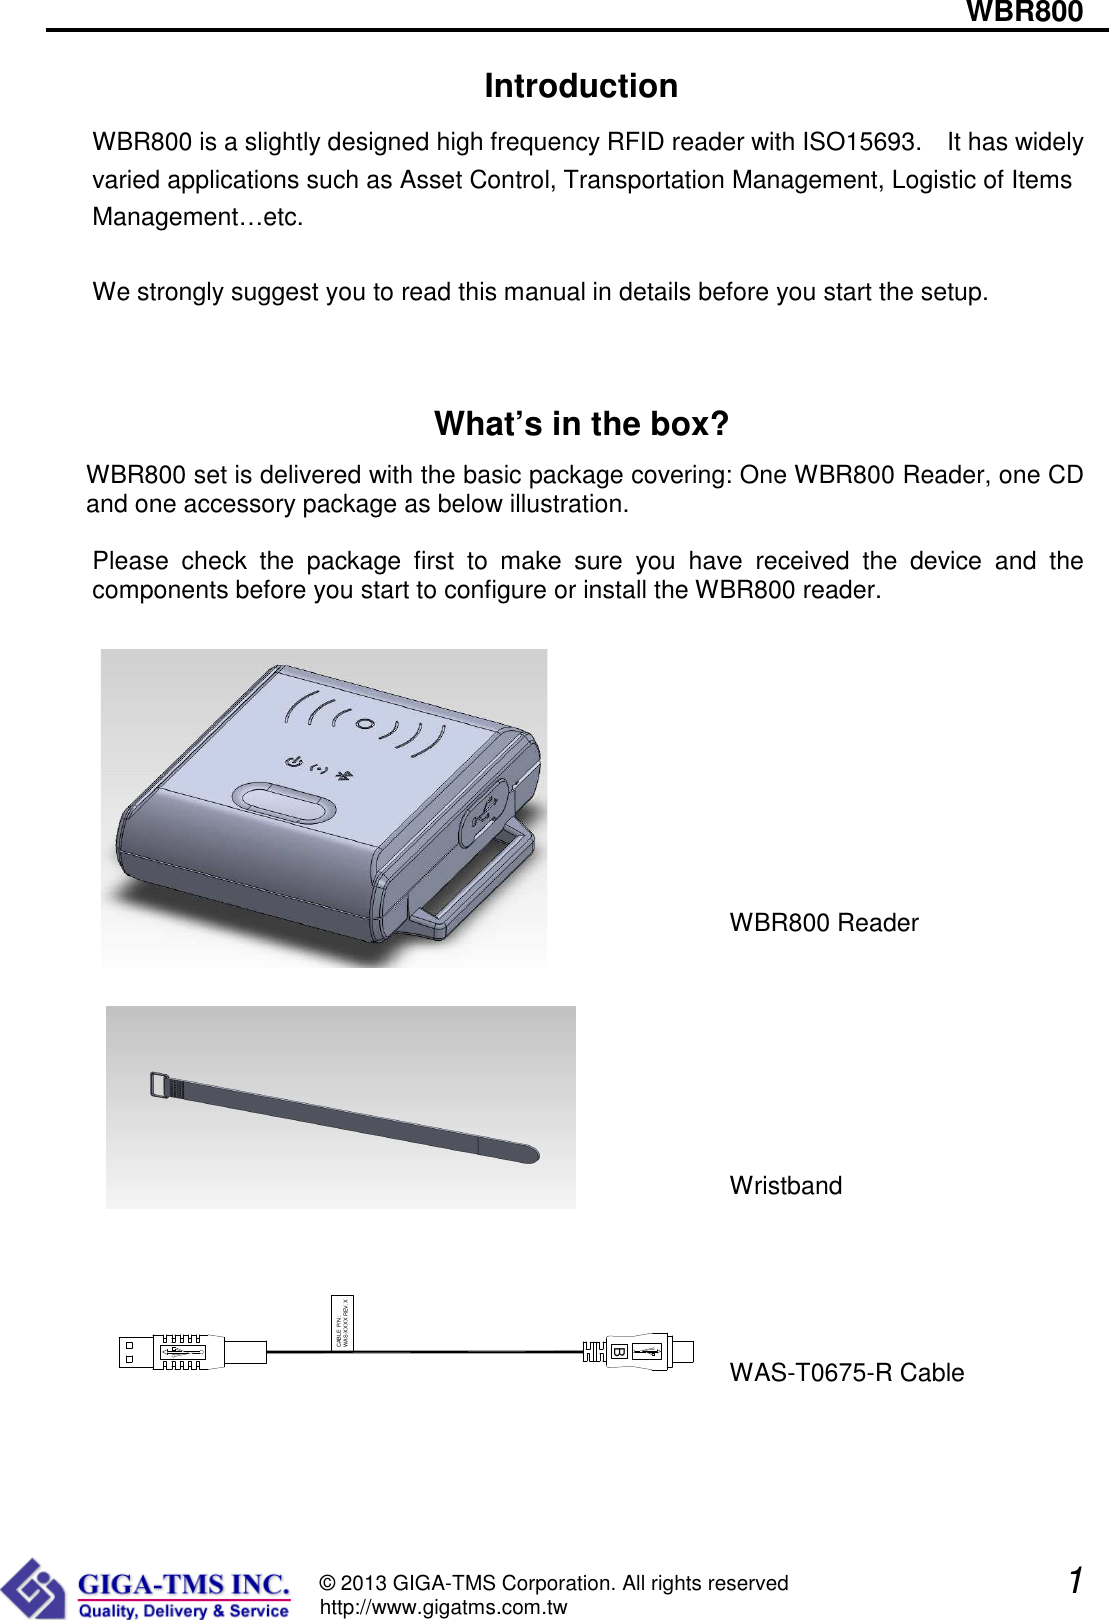                                                                    WBR800               1  © 2013 GIGA-TMS Corporation. All rights reserved http://www.gigatms.com.tw Introduction WBR800 is a slightly designed high frequency RFID reader with ISO15693.    It has widely varied applications such as Asset Control, Transportation Management, Logistic of Items Management…etc.  We strongly suggest you to read this manual in details before you start the setup.  What’s in the box? WBR800 set is delivered with the basic package covering: One WBR800 Reader, one CD and one accessory package as below illustration.  Please  check  the  package  first  to  make  sure  you  have  received  the  device  and  the components before you start to configure or install the WBR800 reader.                                                                                                                     WBR800 Reader                                                                                                                                                                                Wristband                                                                                                                                                                                                                                             WAS-T0675-R Cable   BCABLE P/N :WAS-XXXX REV.X